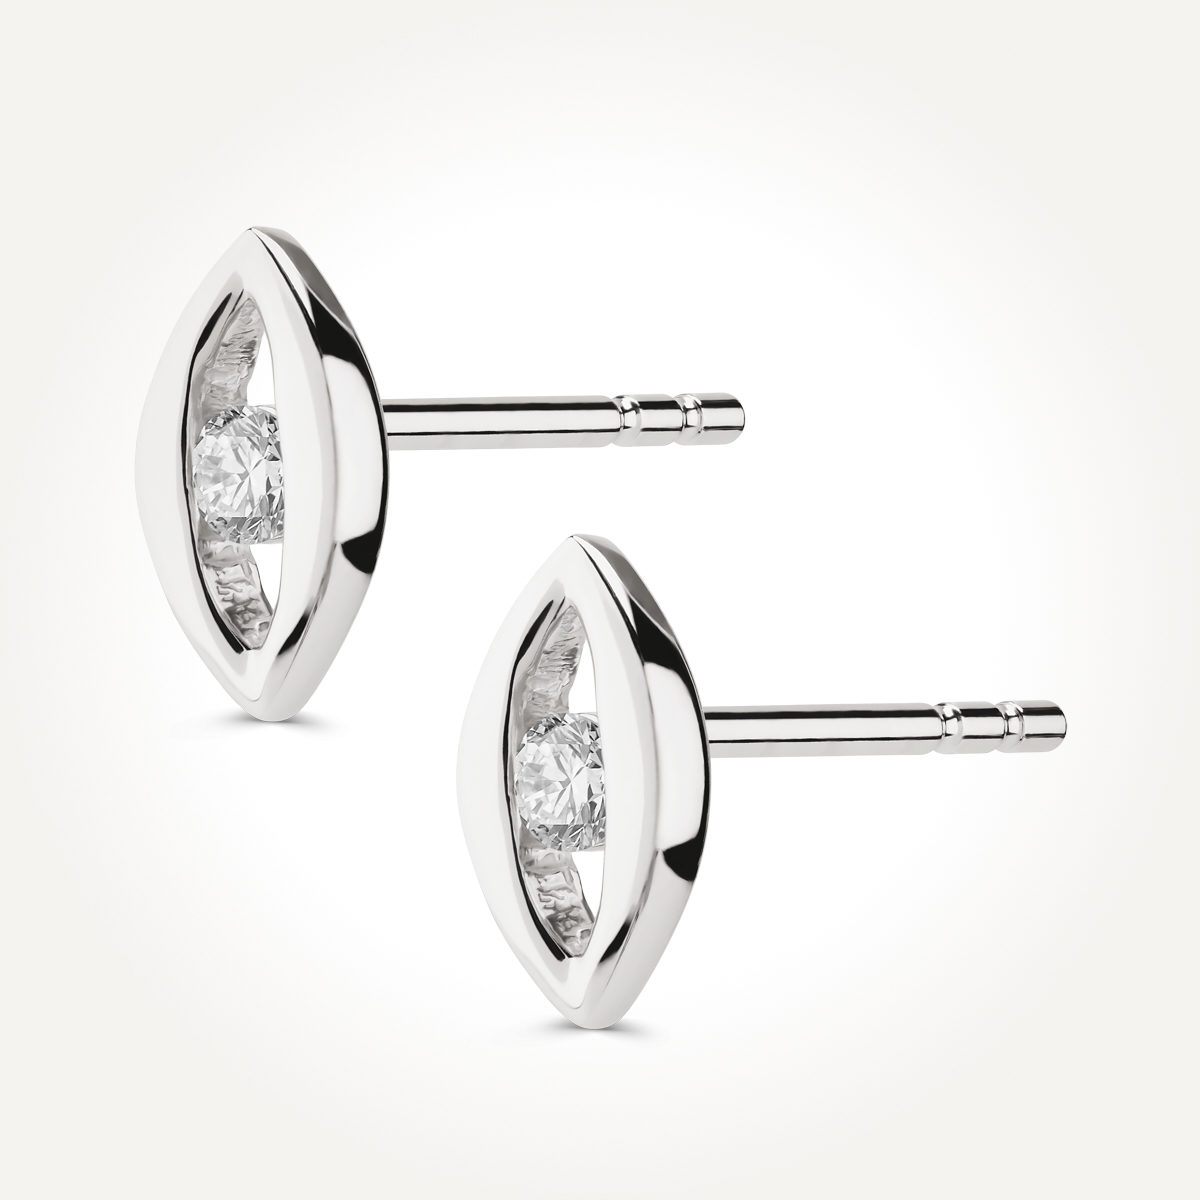 14KT White Gold Marquise Shaped Stud Earrings